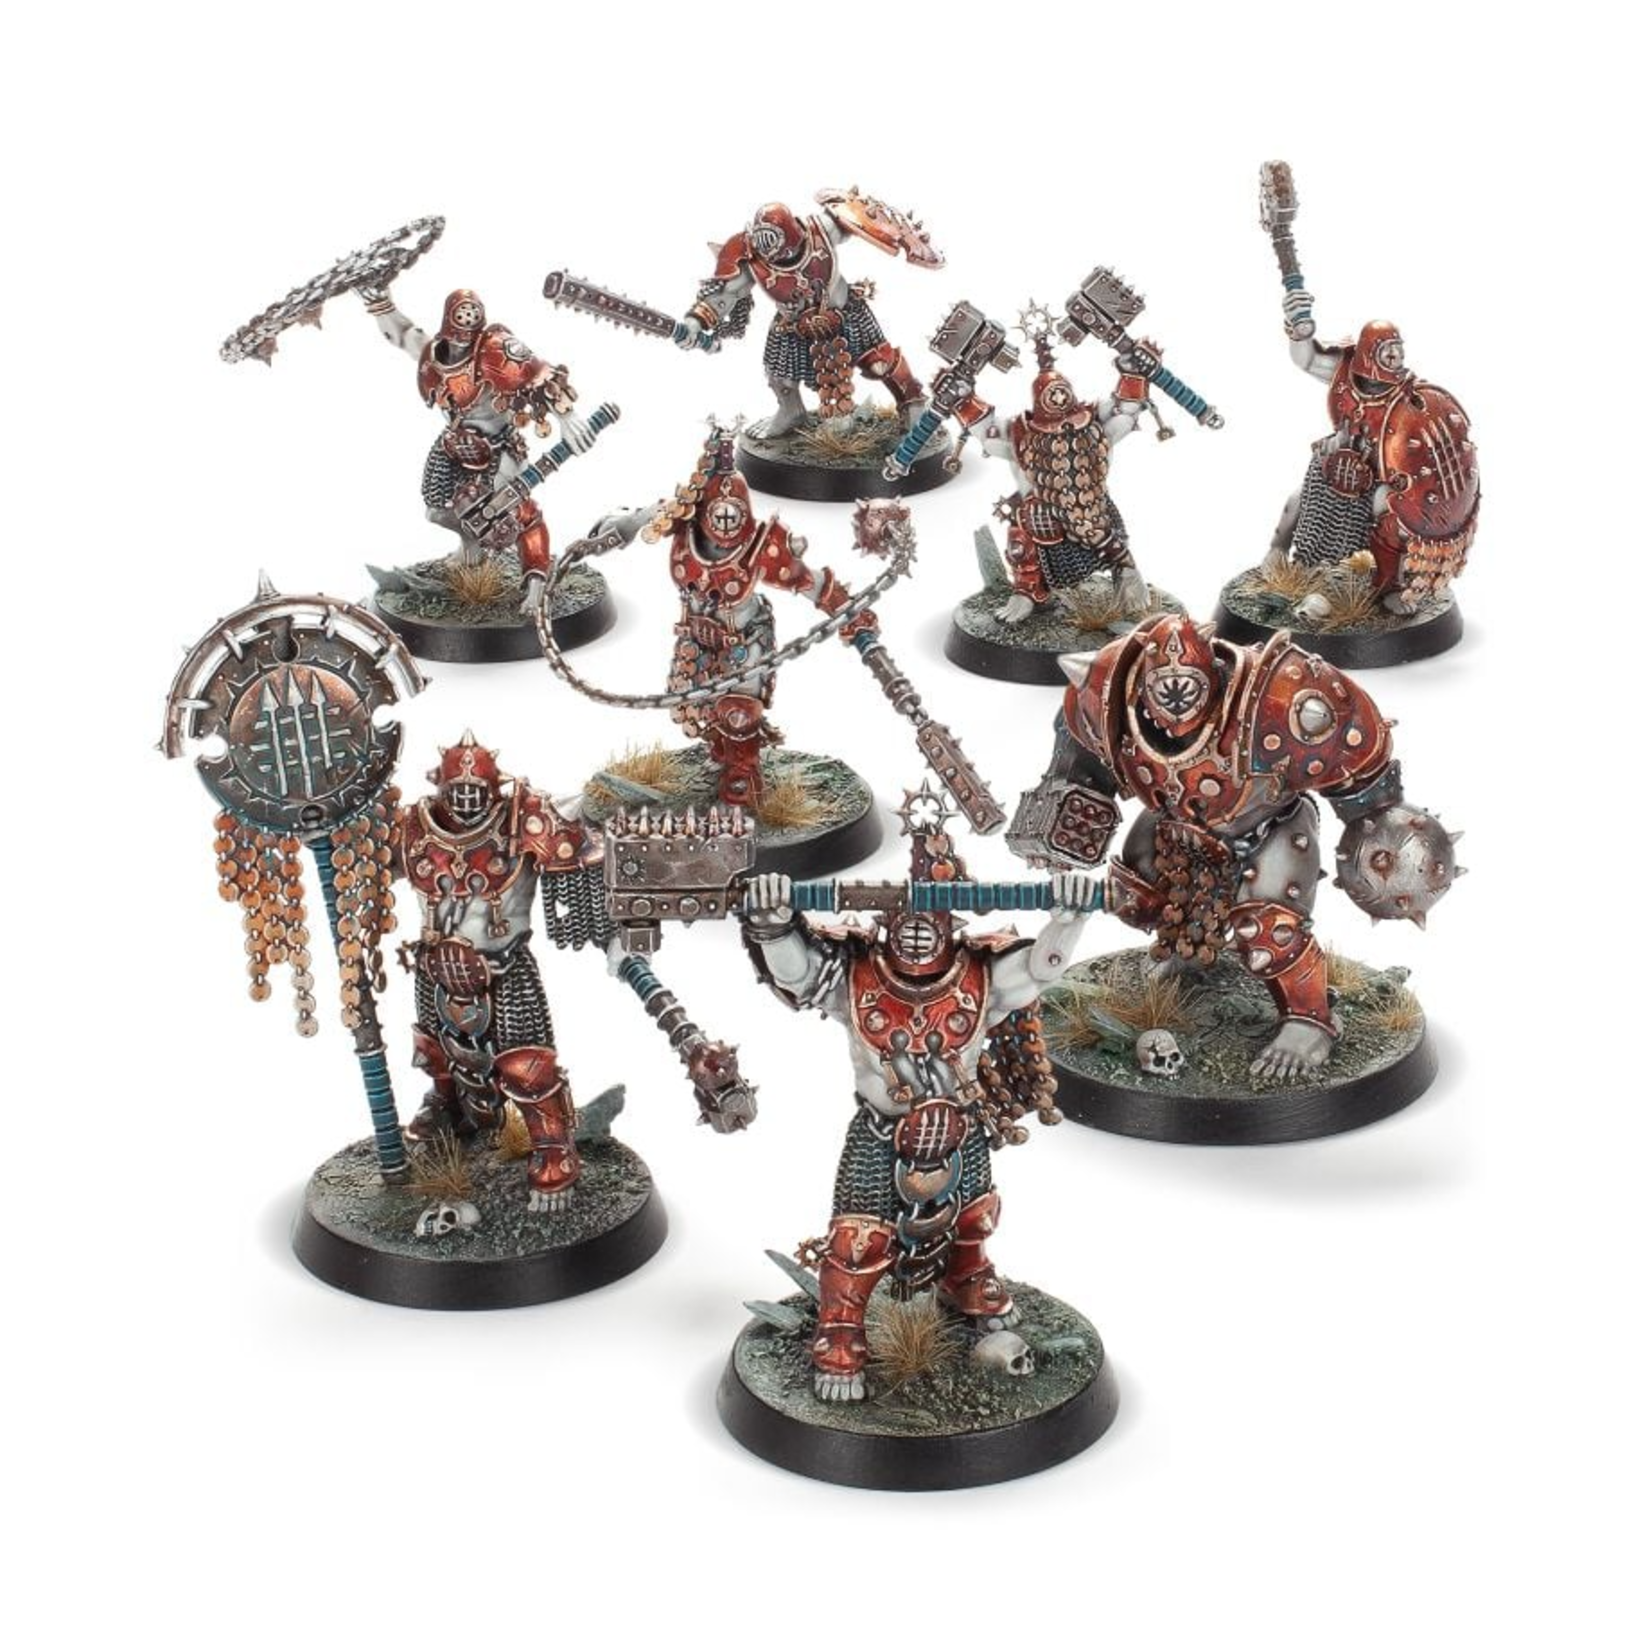 Games Workshop Warhammer Age of Sigmar Chaos Slaves to Darkness Iron Golems